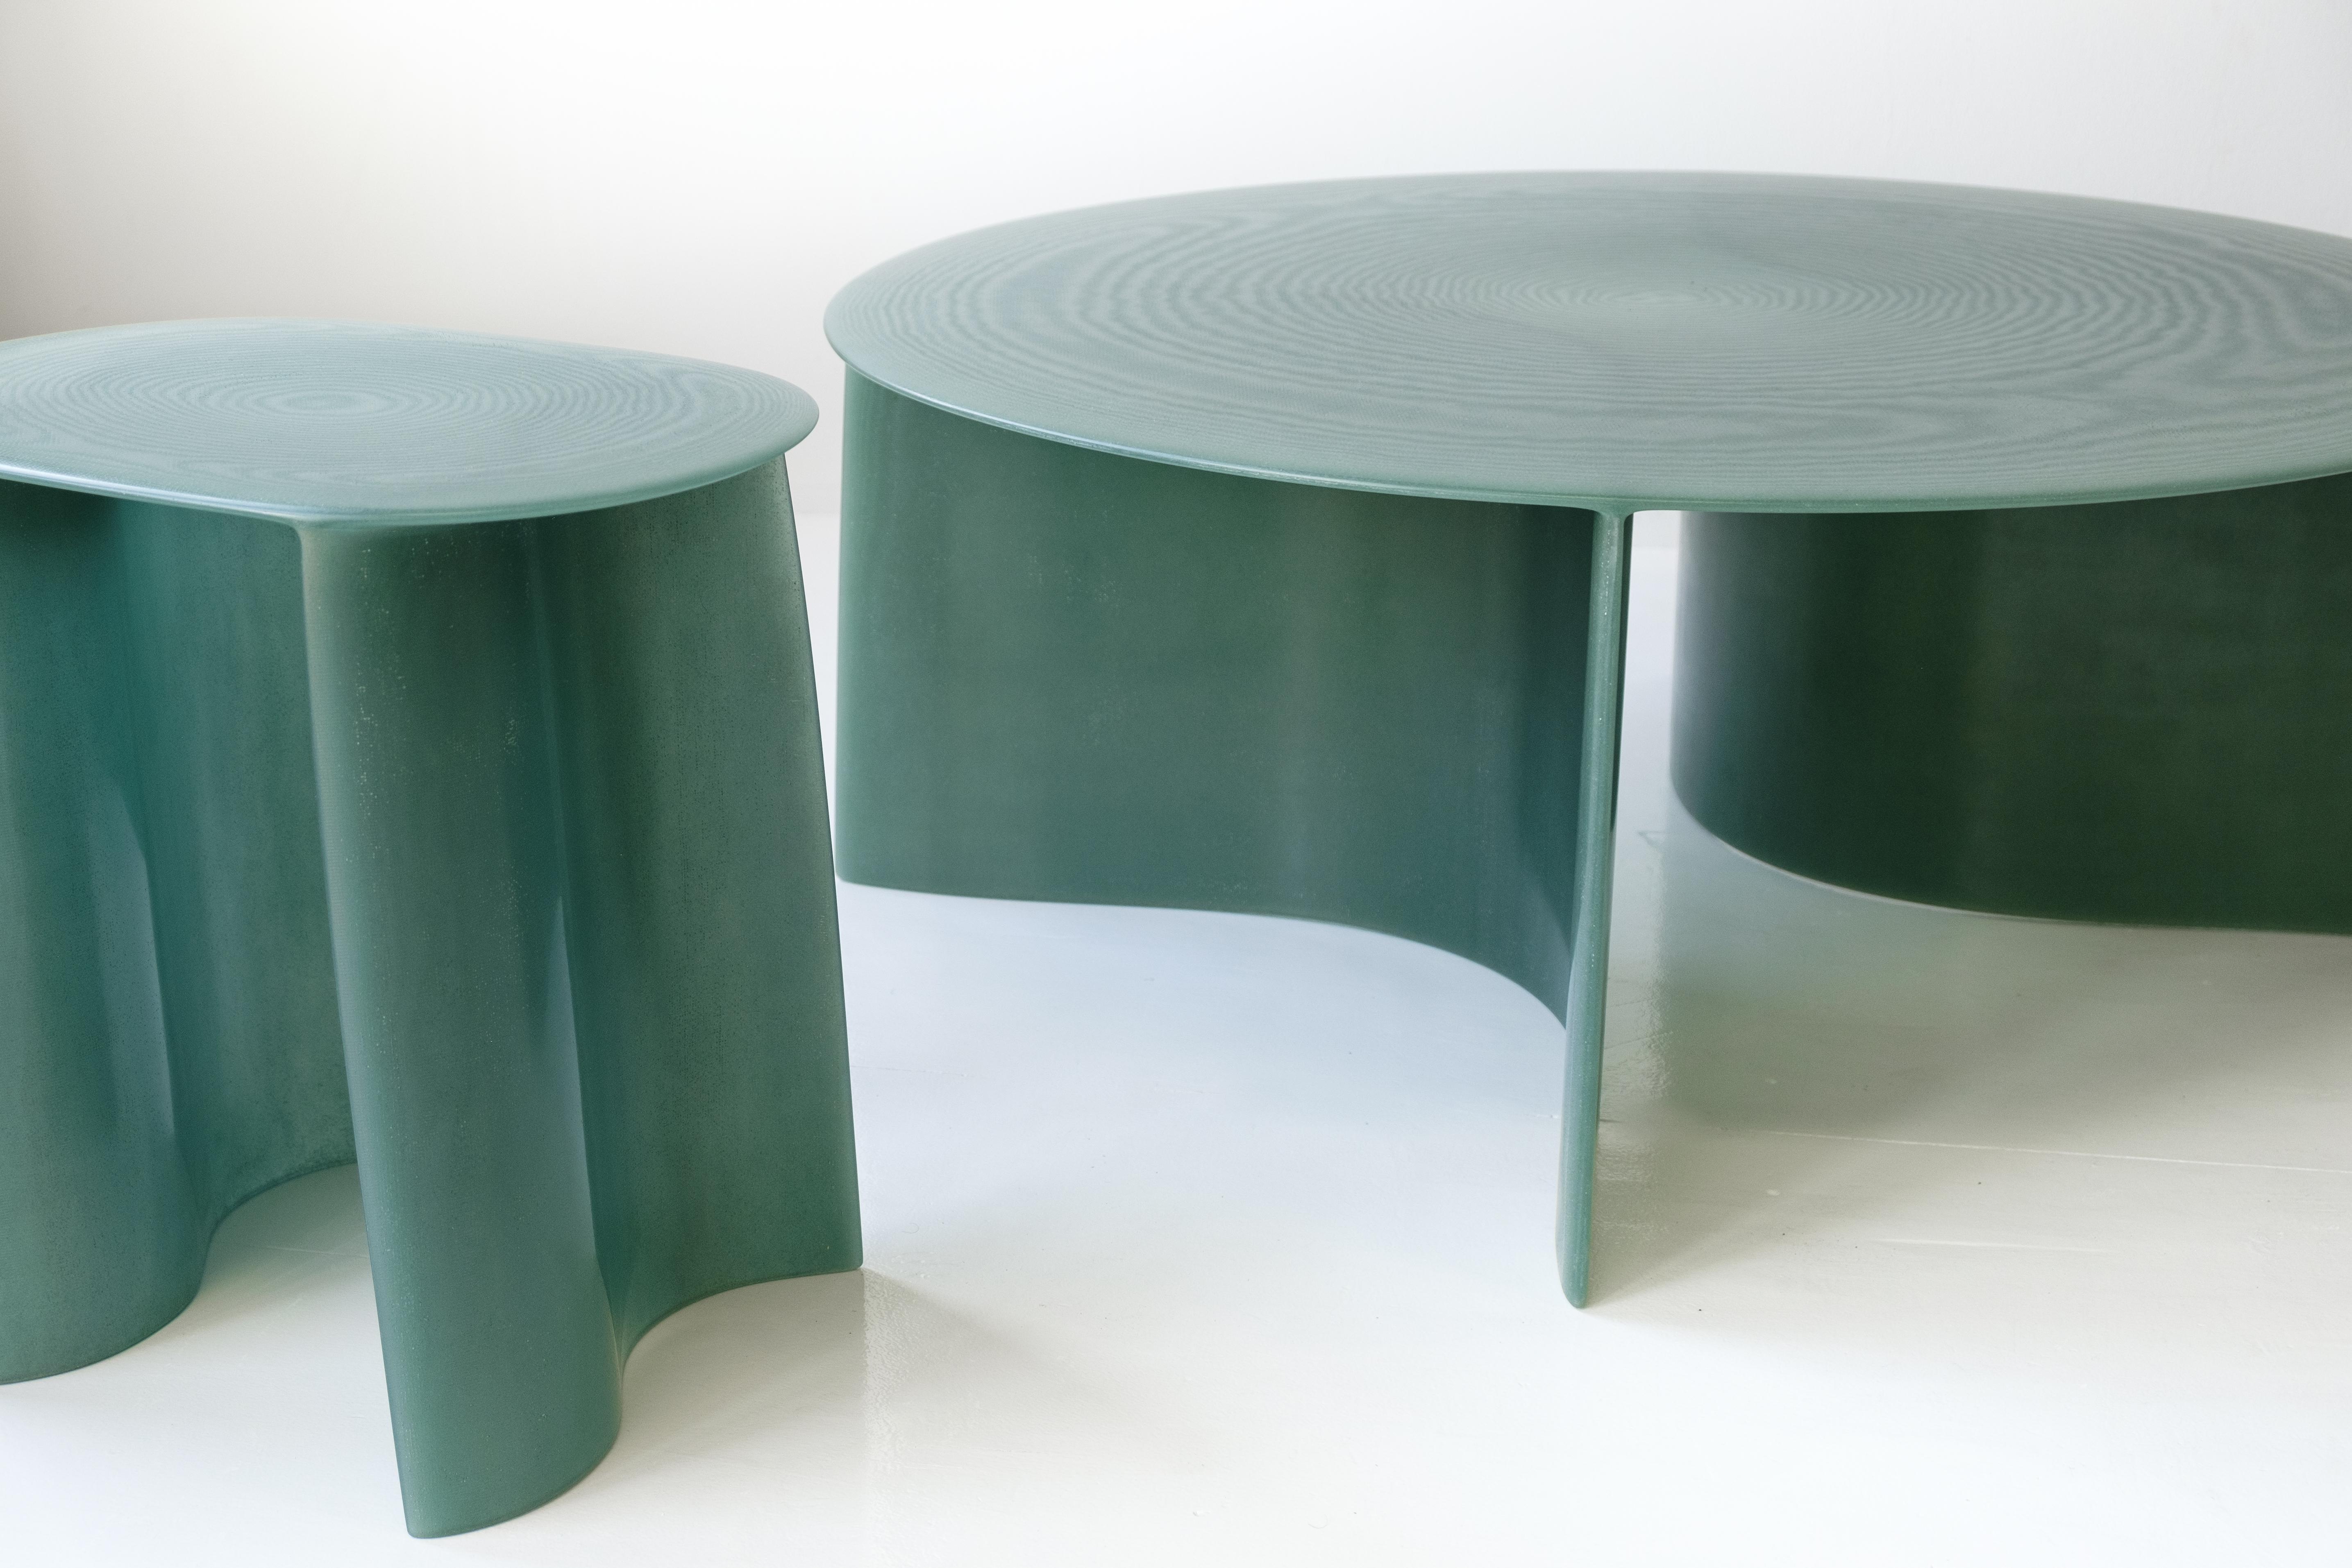 Dutch Contemporary Green Fiberglass, New Wave Coffee Table Round 120cm, by Lukas Cober